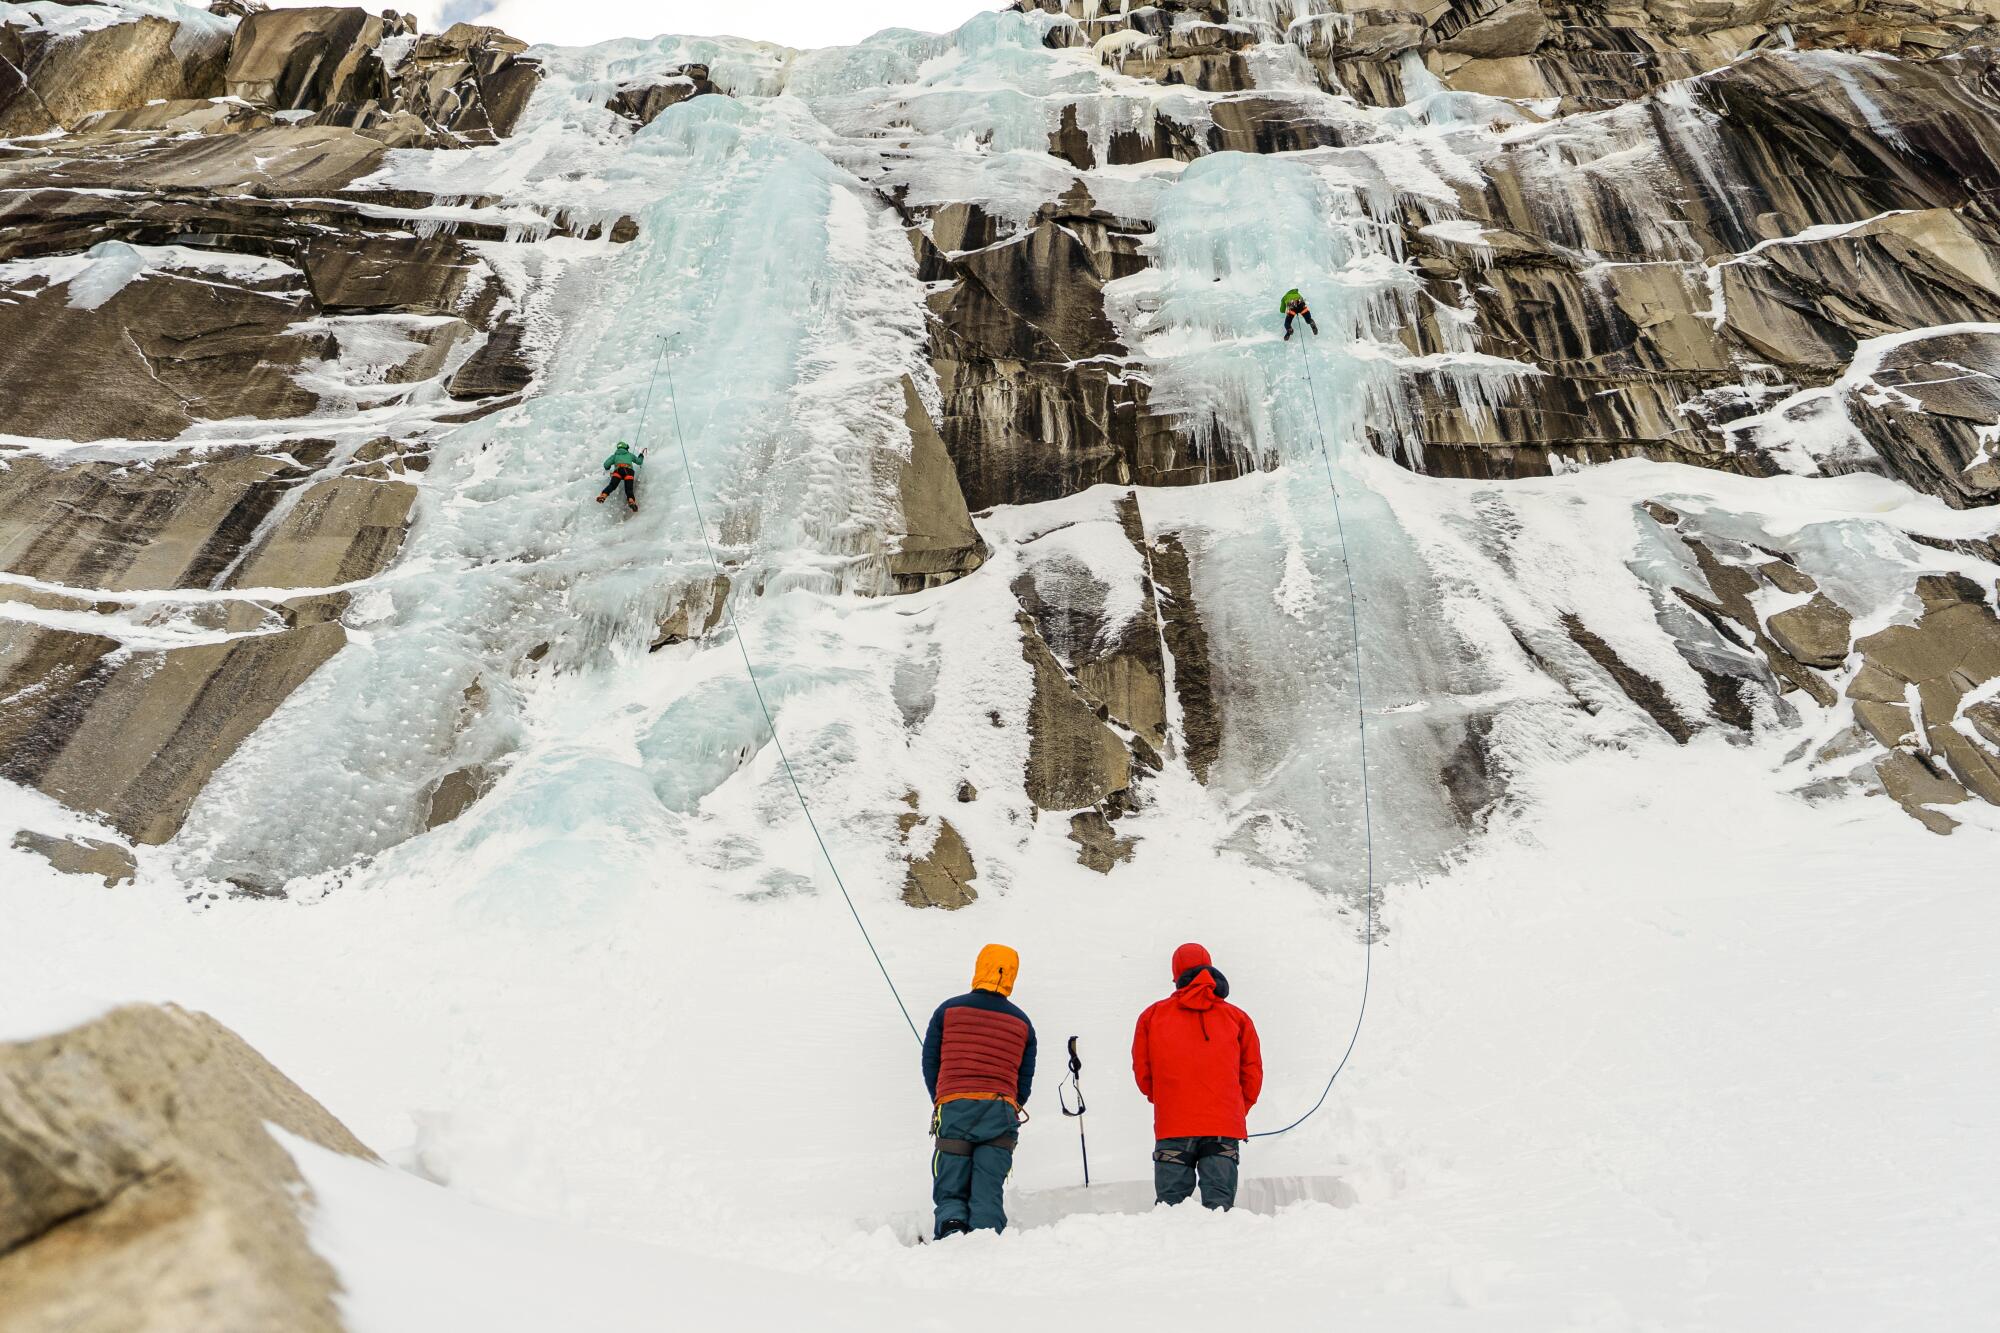 Climbers scale the ice falls at Lee Vining Canyon, about 30 miles north of Mammoth